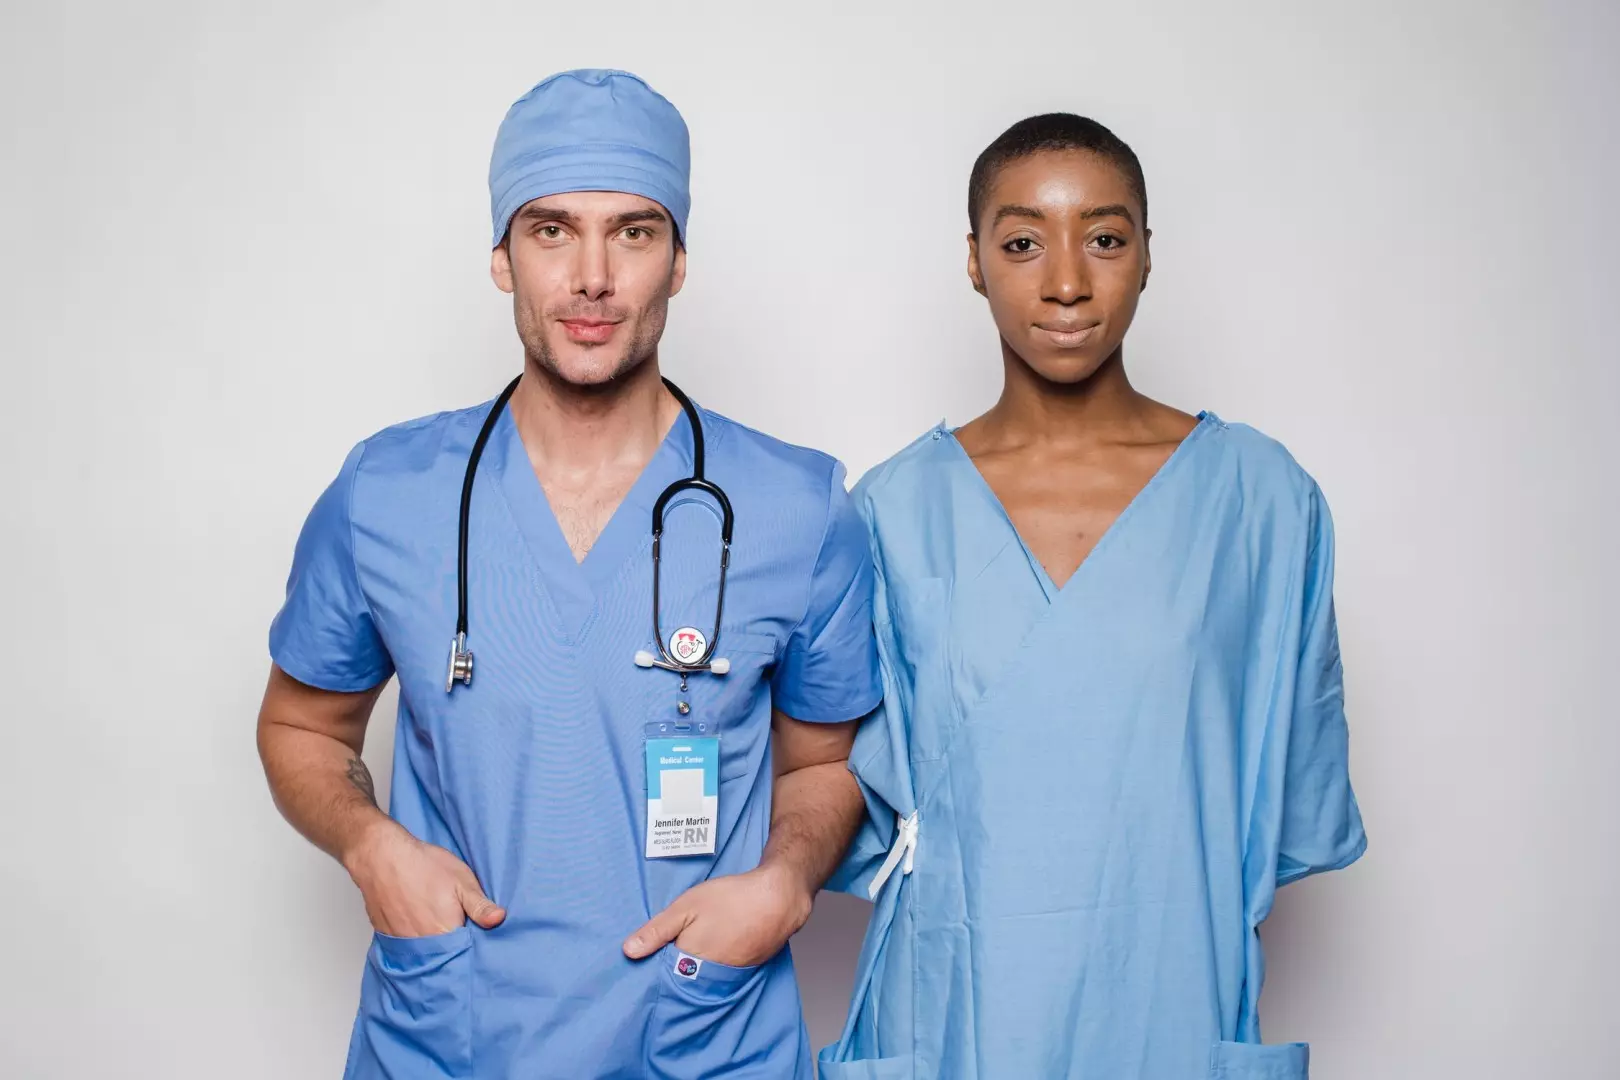 10 Reasons Why You Should Become a Nurse